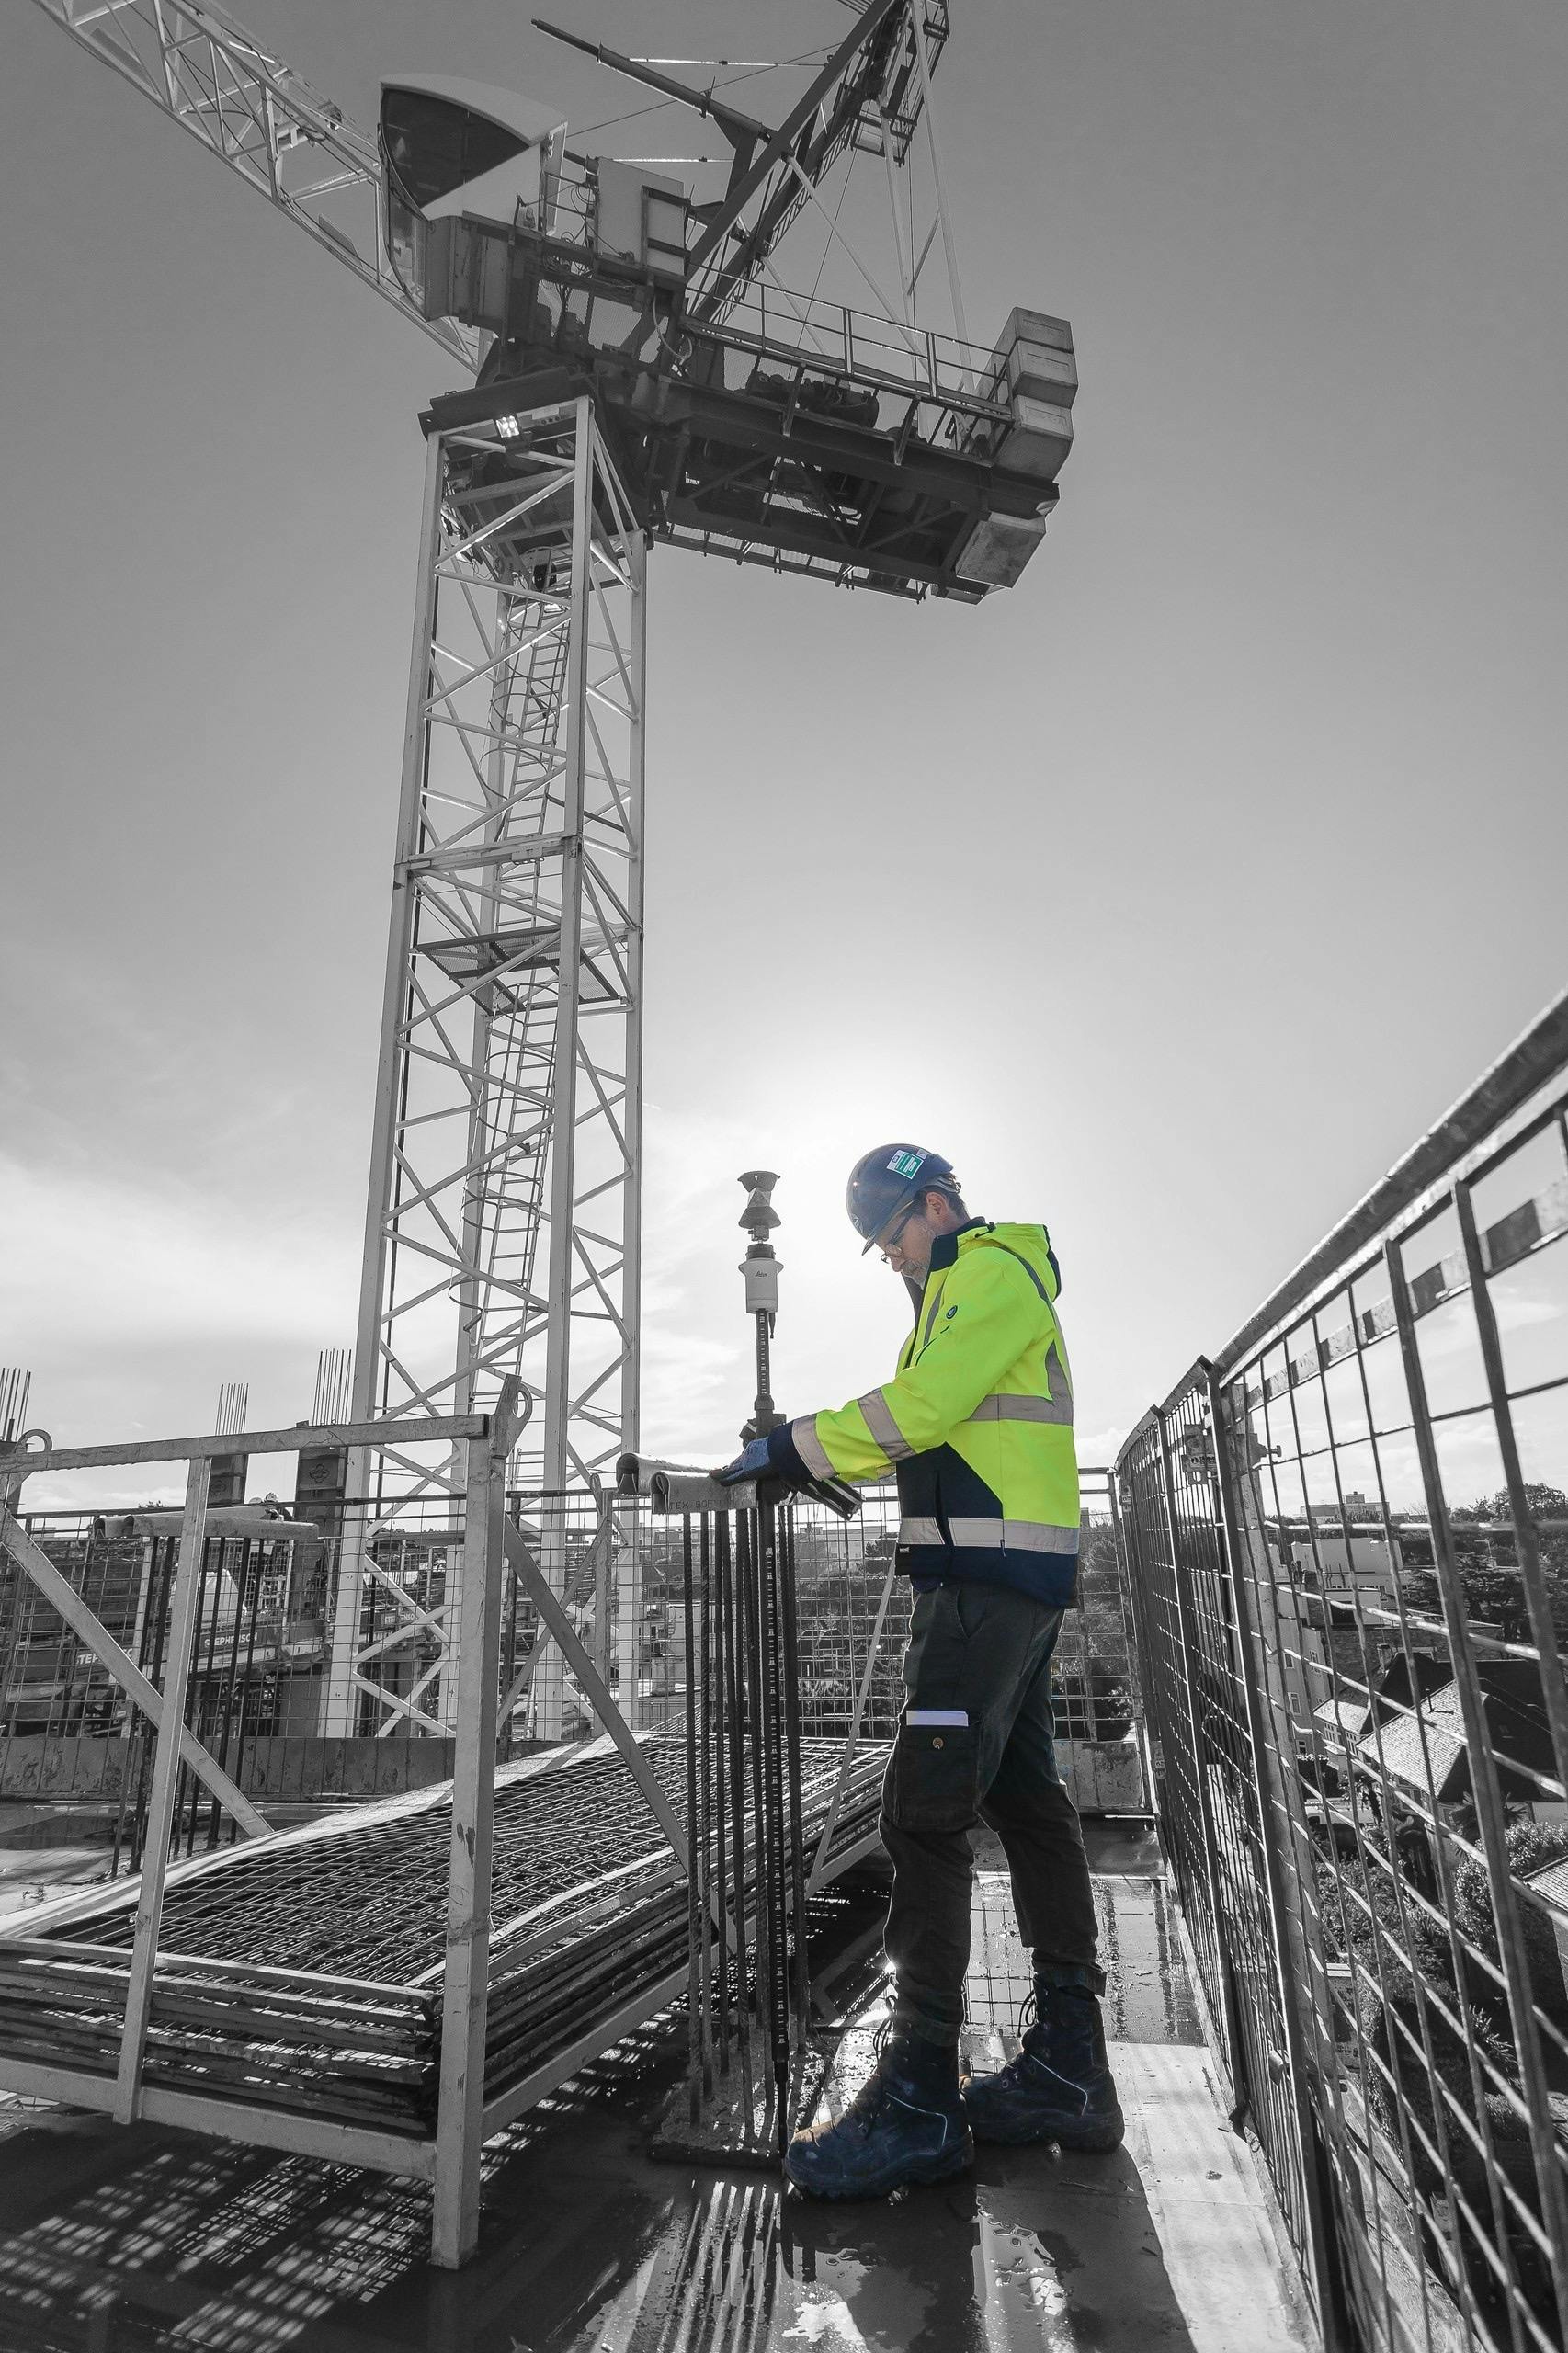 Surveyor on a building site in protective clothing taking measurements with the crane and sun in the background